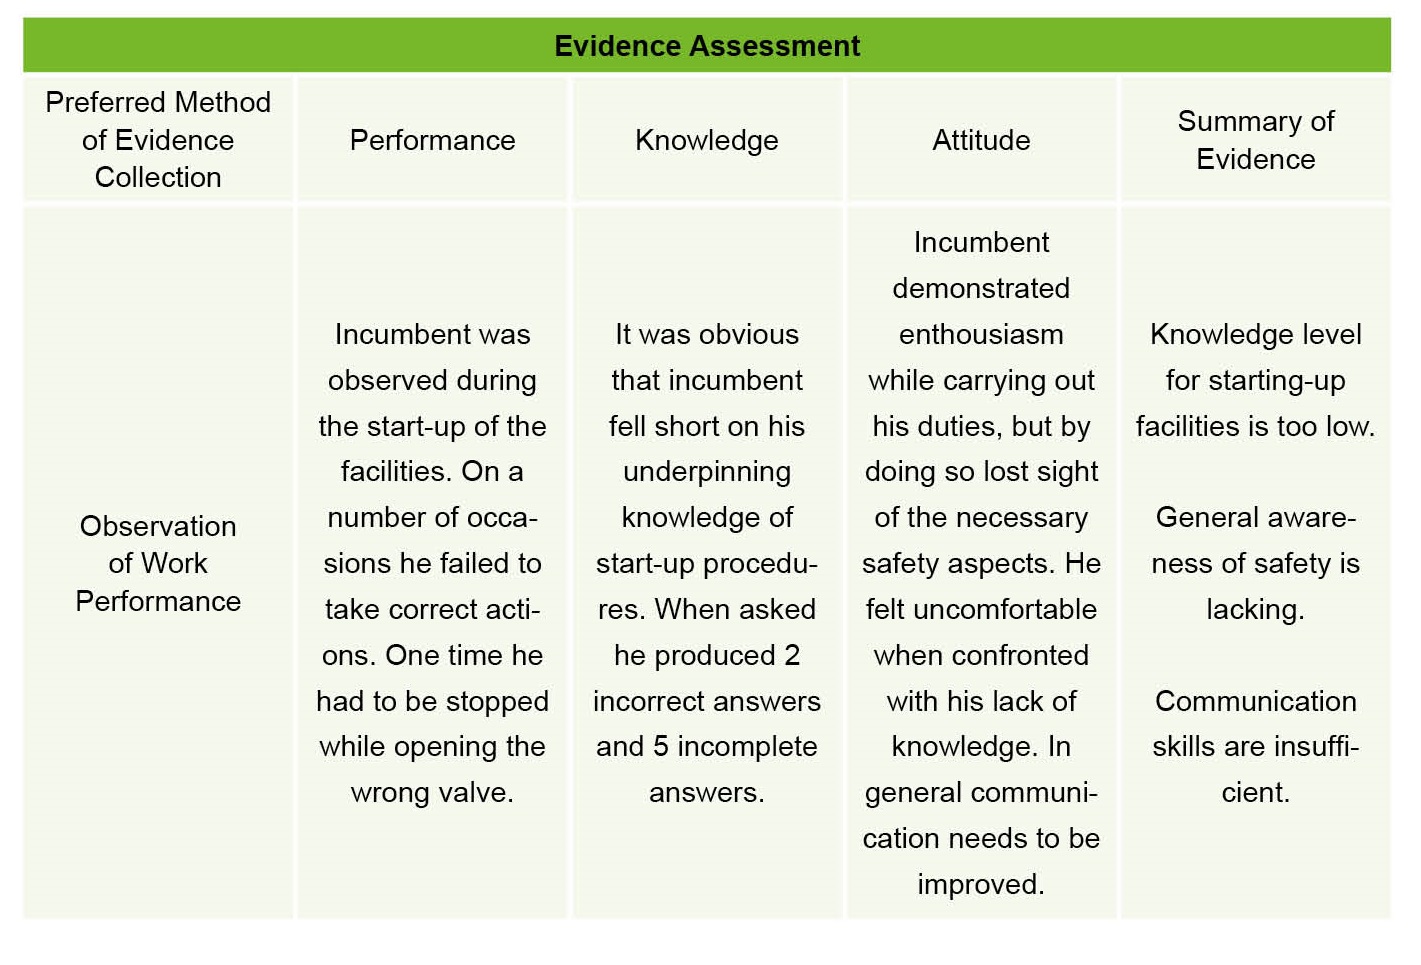 Evidence Assessment, important evidence of performance